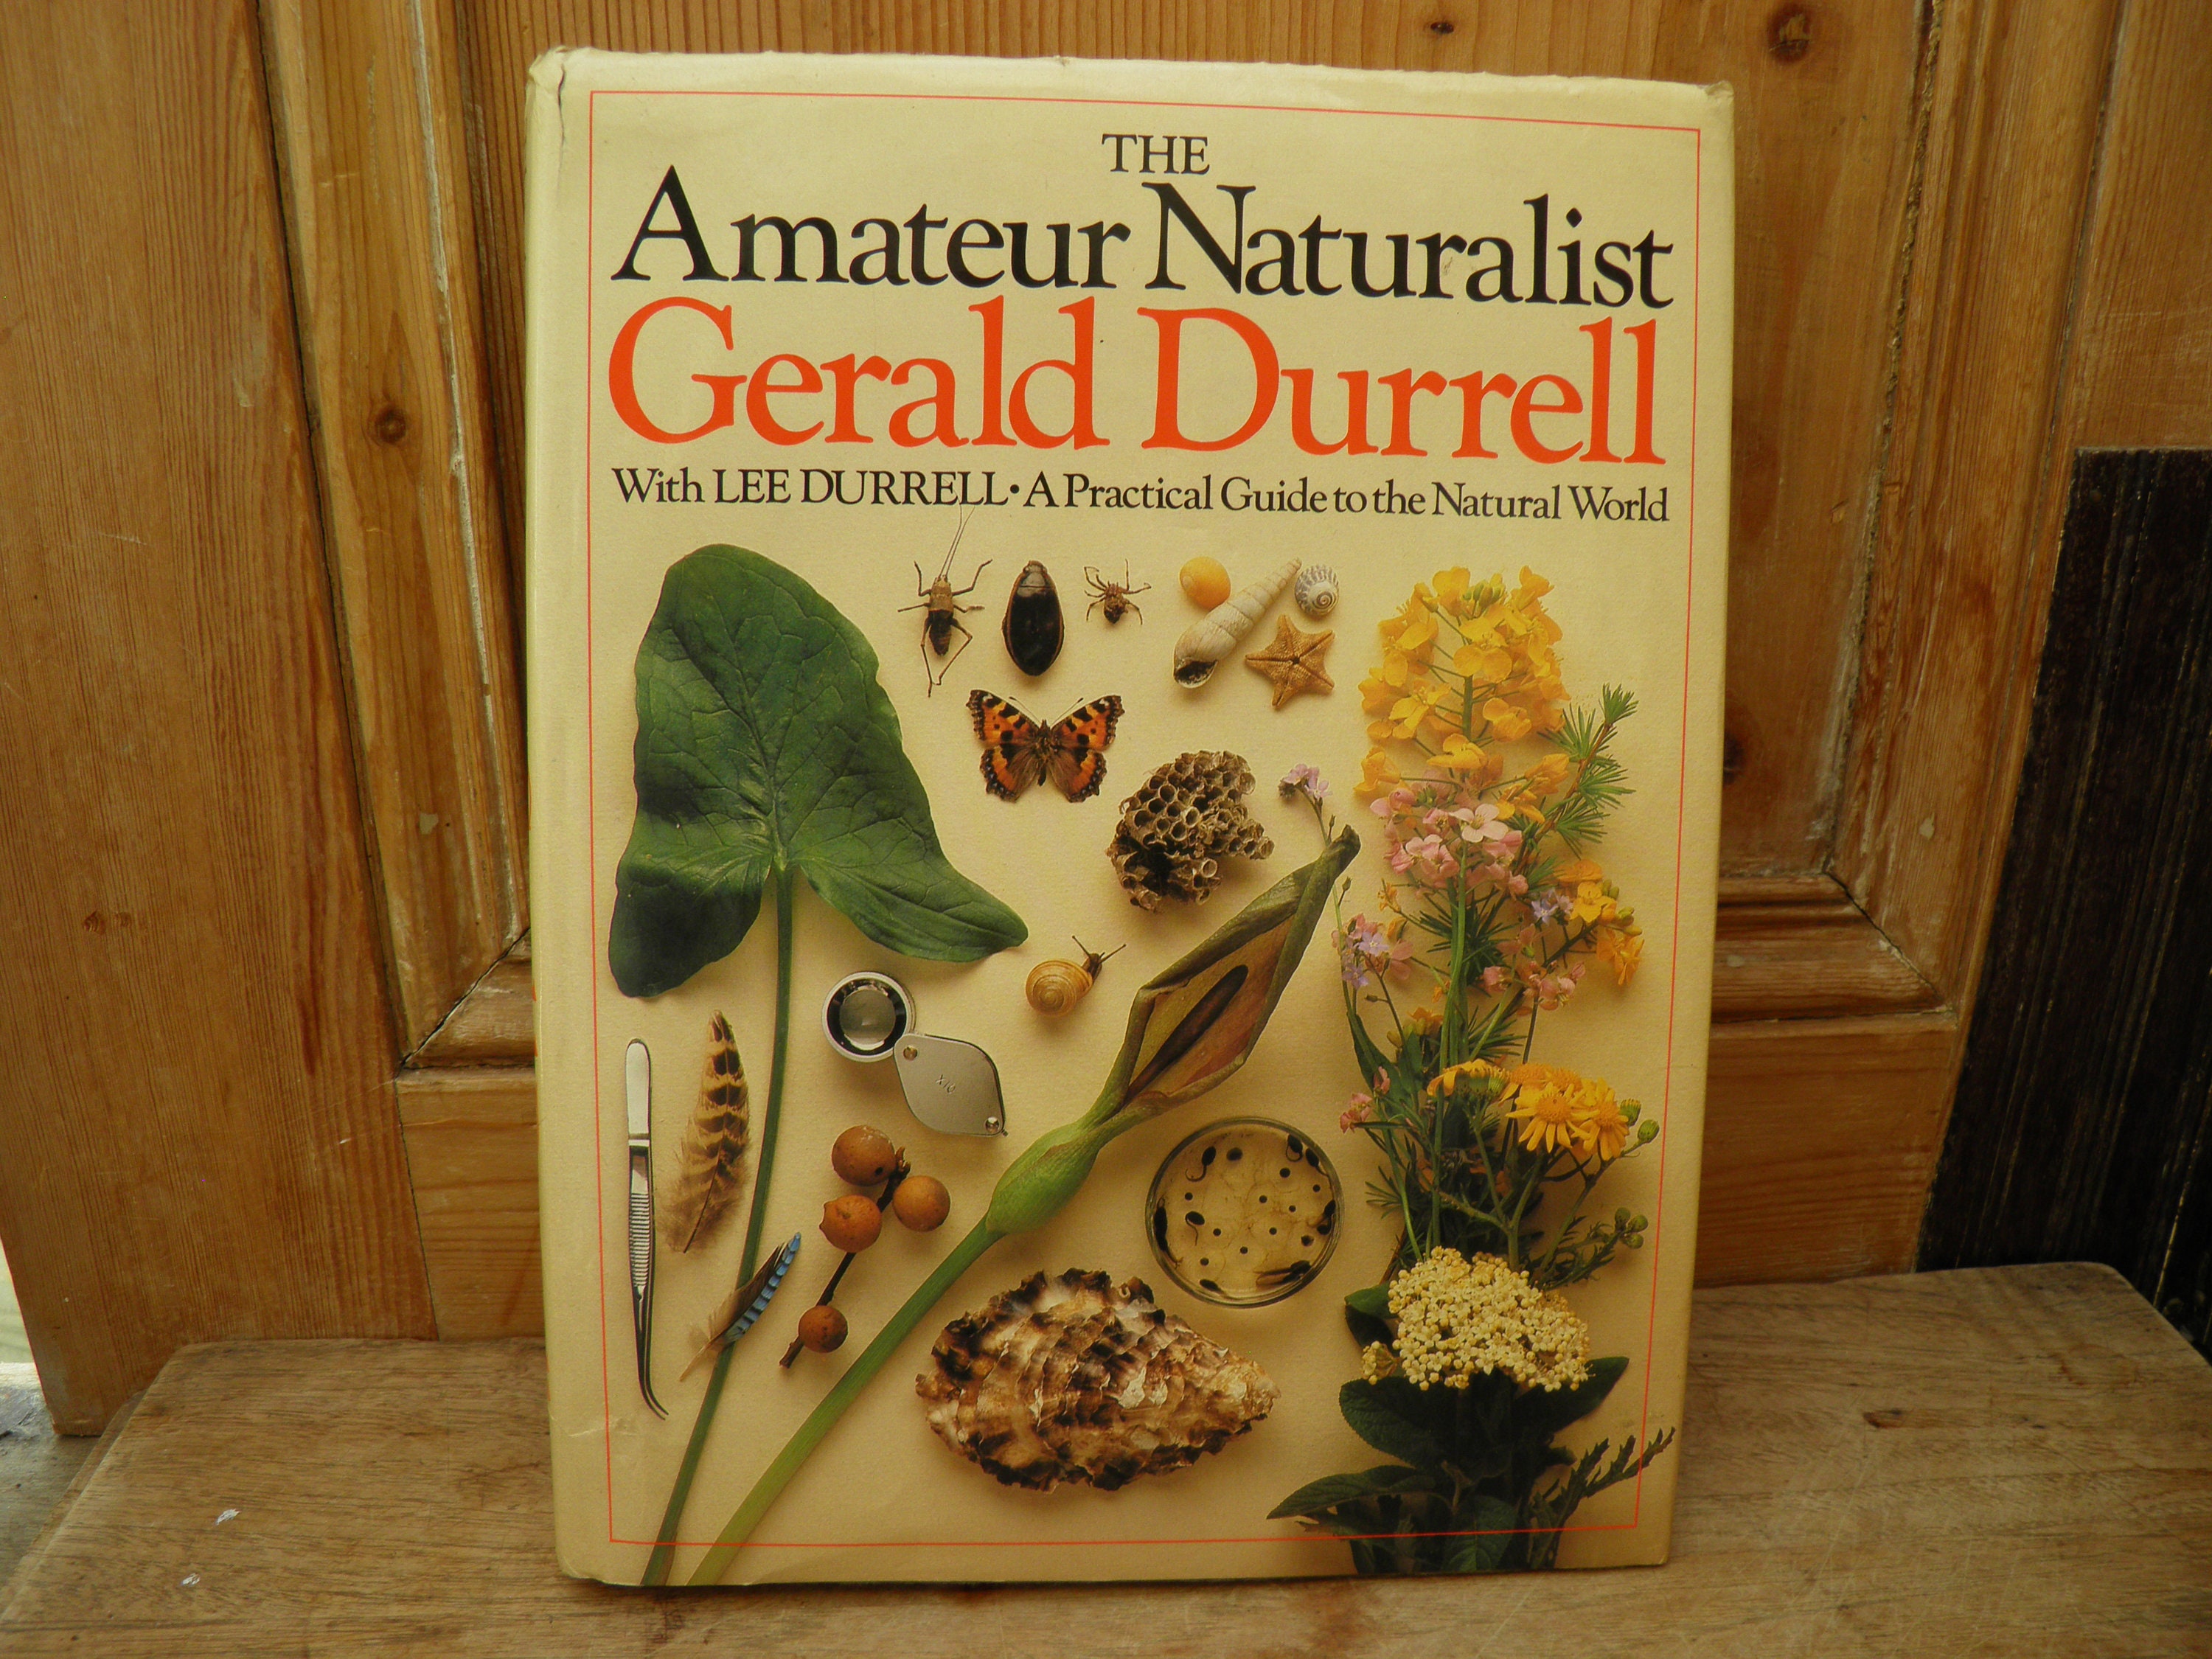 The Amateur Naturalist by Gerald Durrell and Lee Durrell Adult Picture